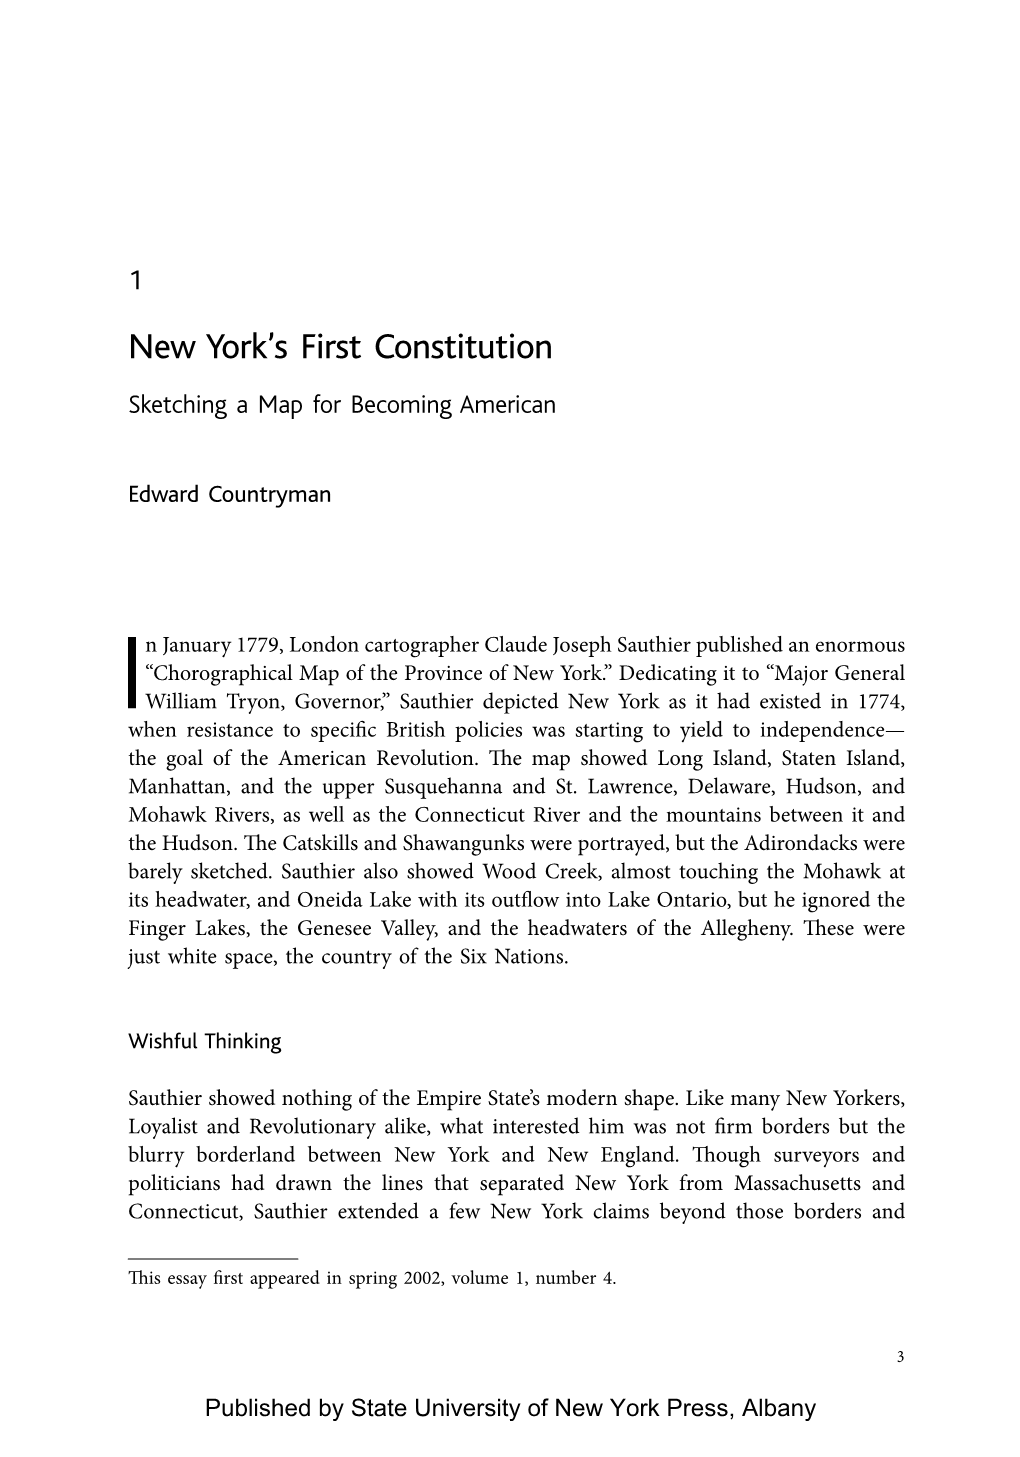 New York's First Constitution